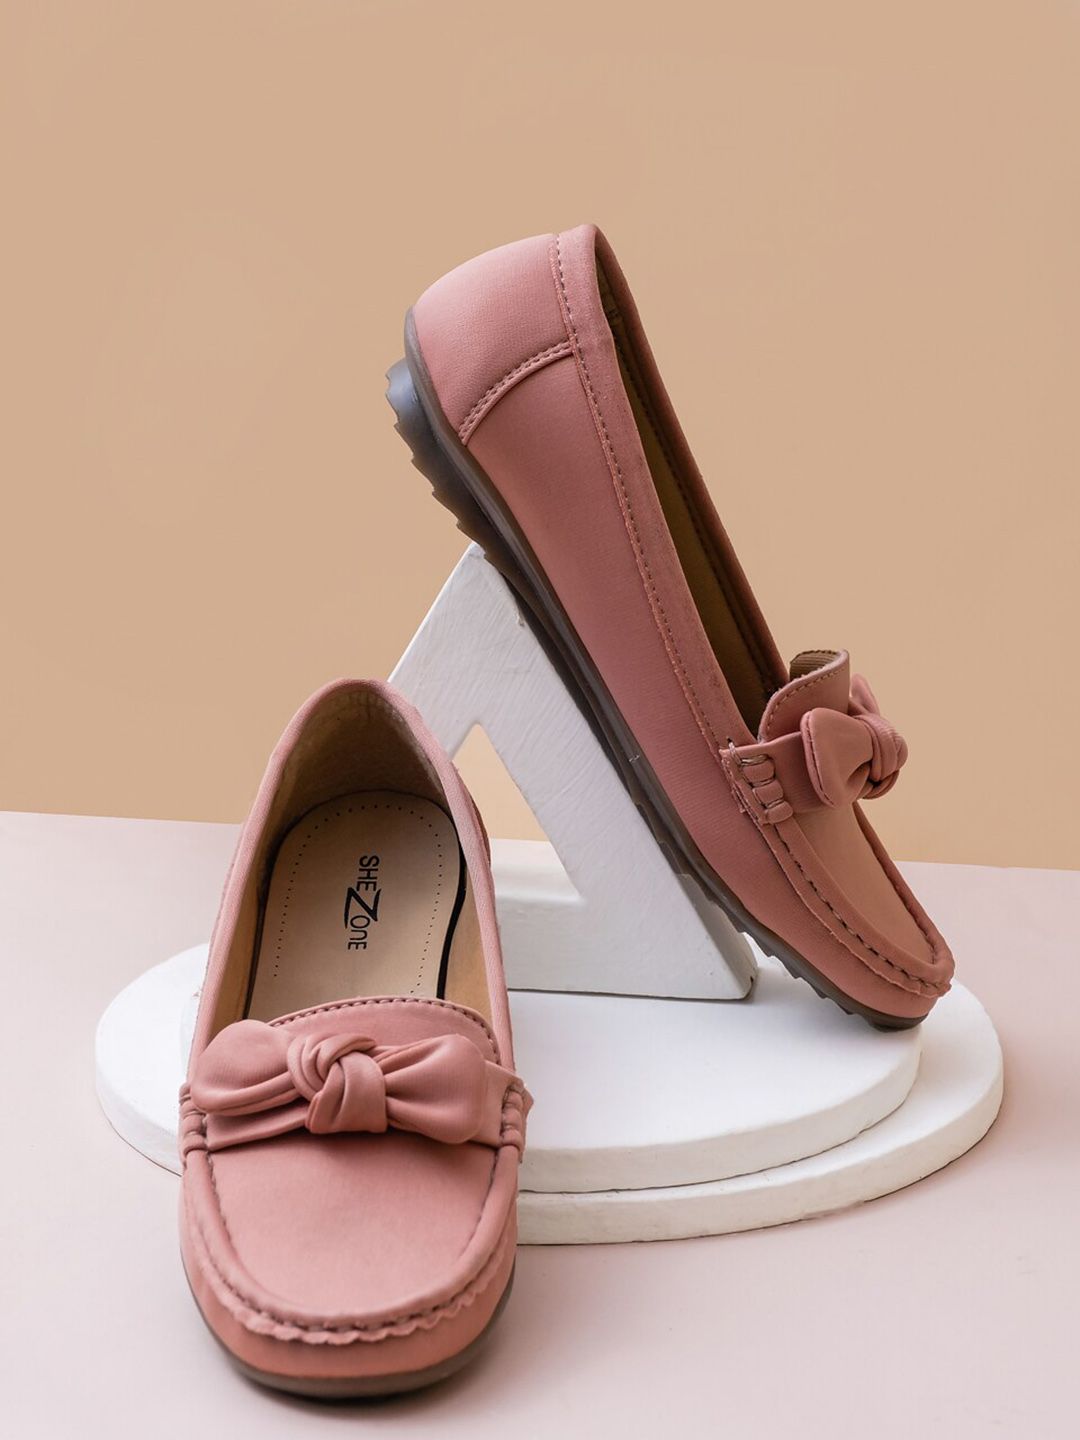 Shezone Women Peach-Coloured Ballerinas with Bows Flats Price in India